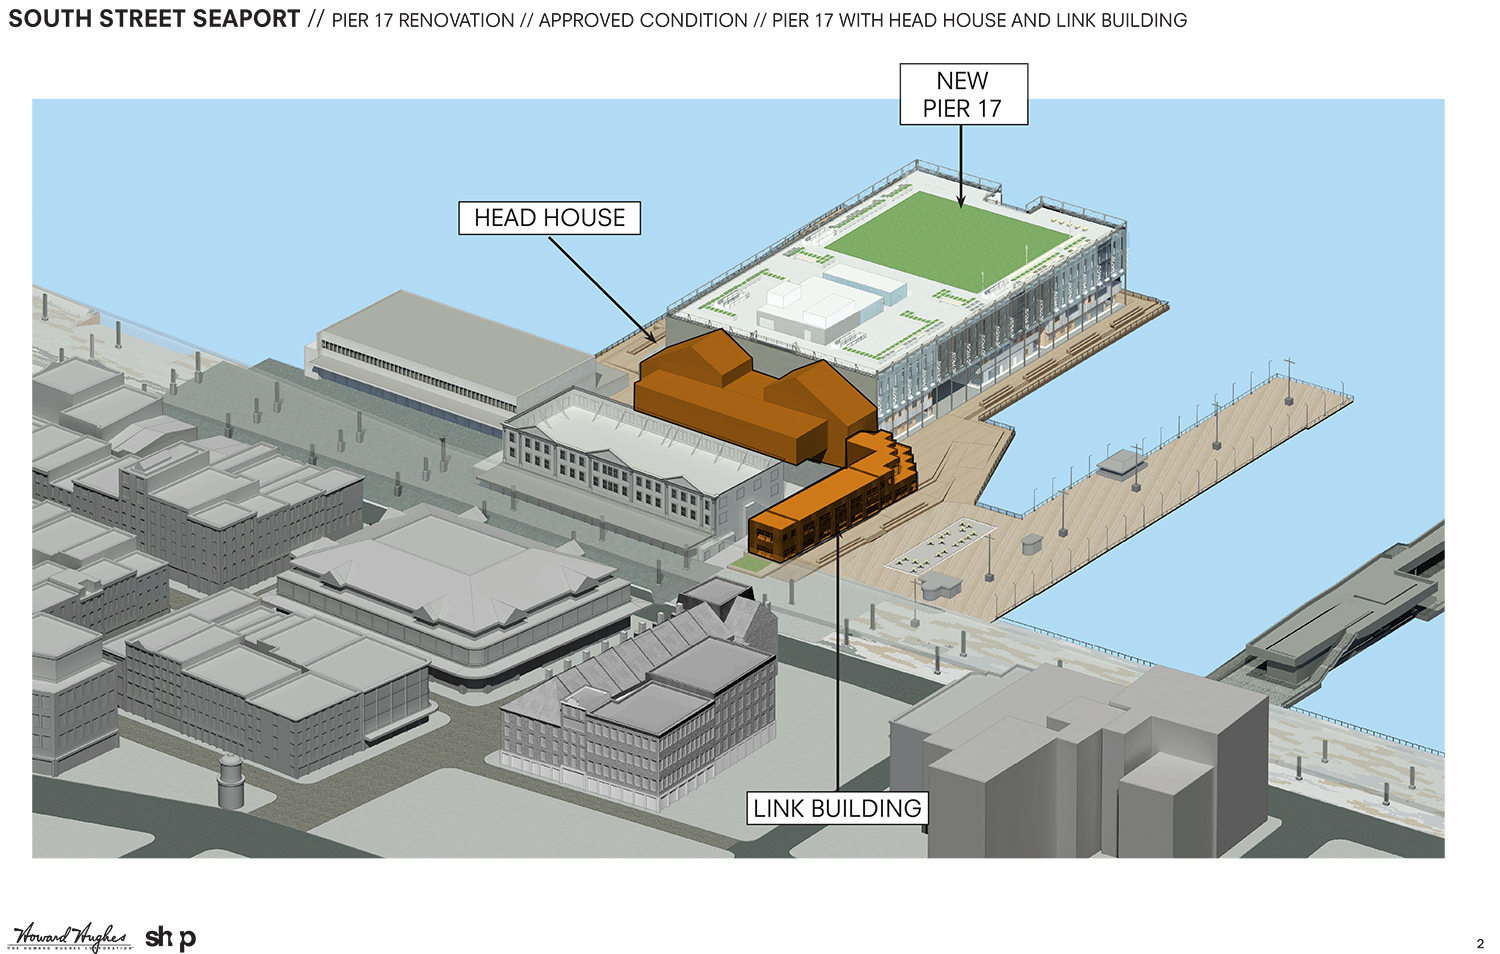 With Rooftop Pergola Gone, South Street Seaport Pier 17 Plan ...